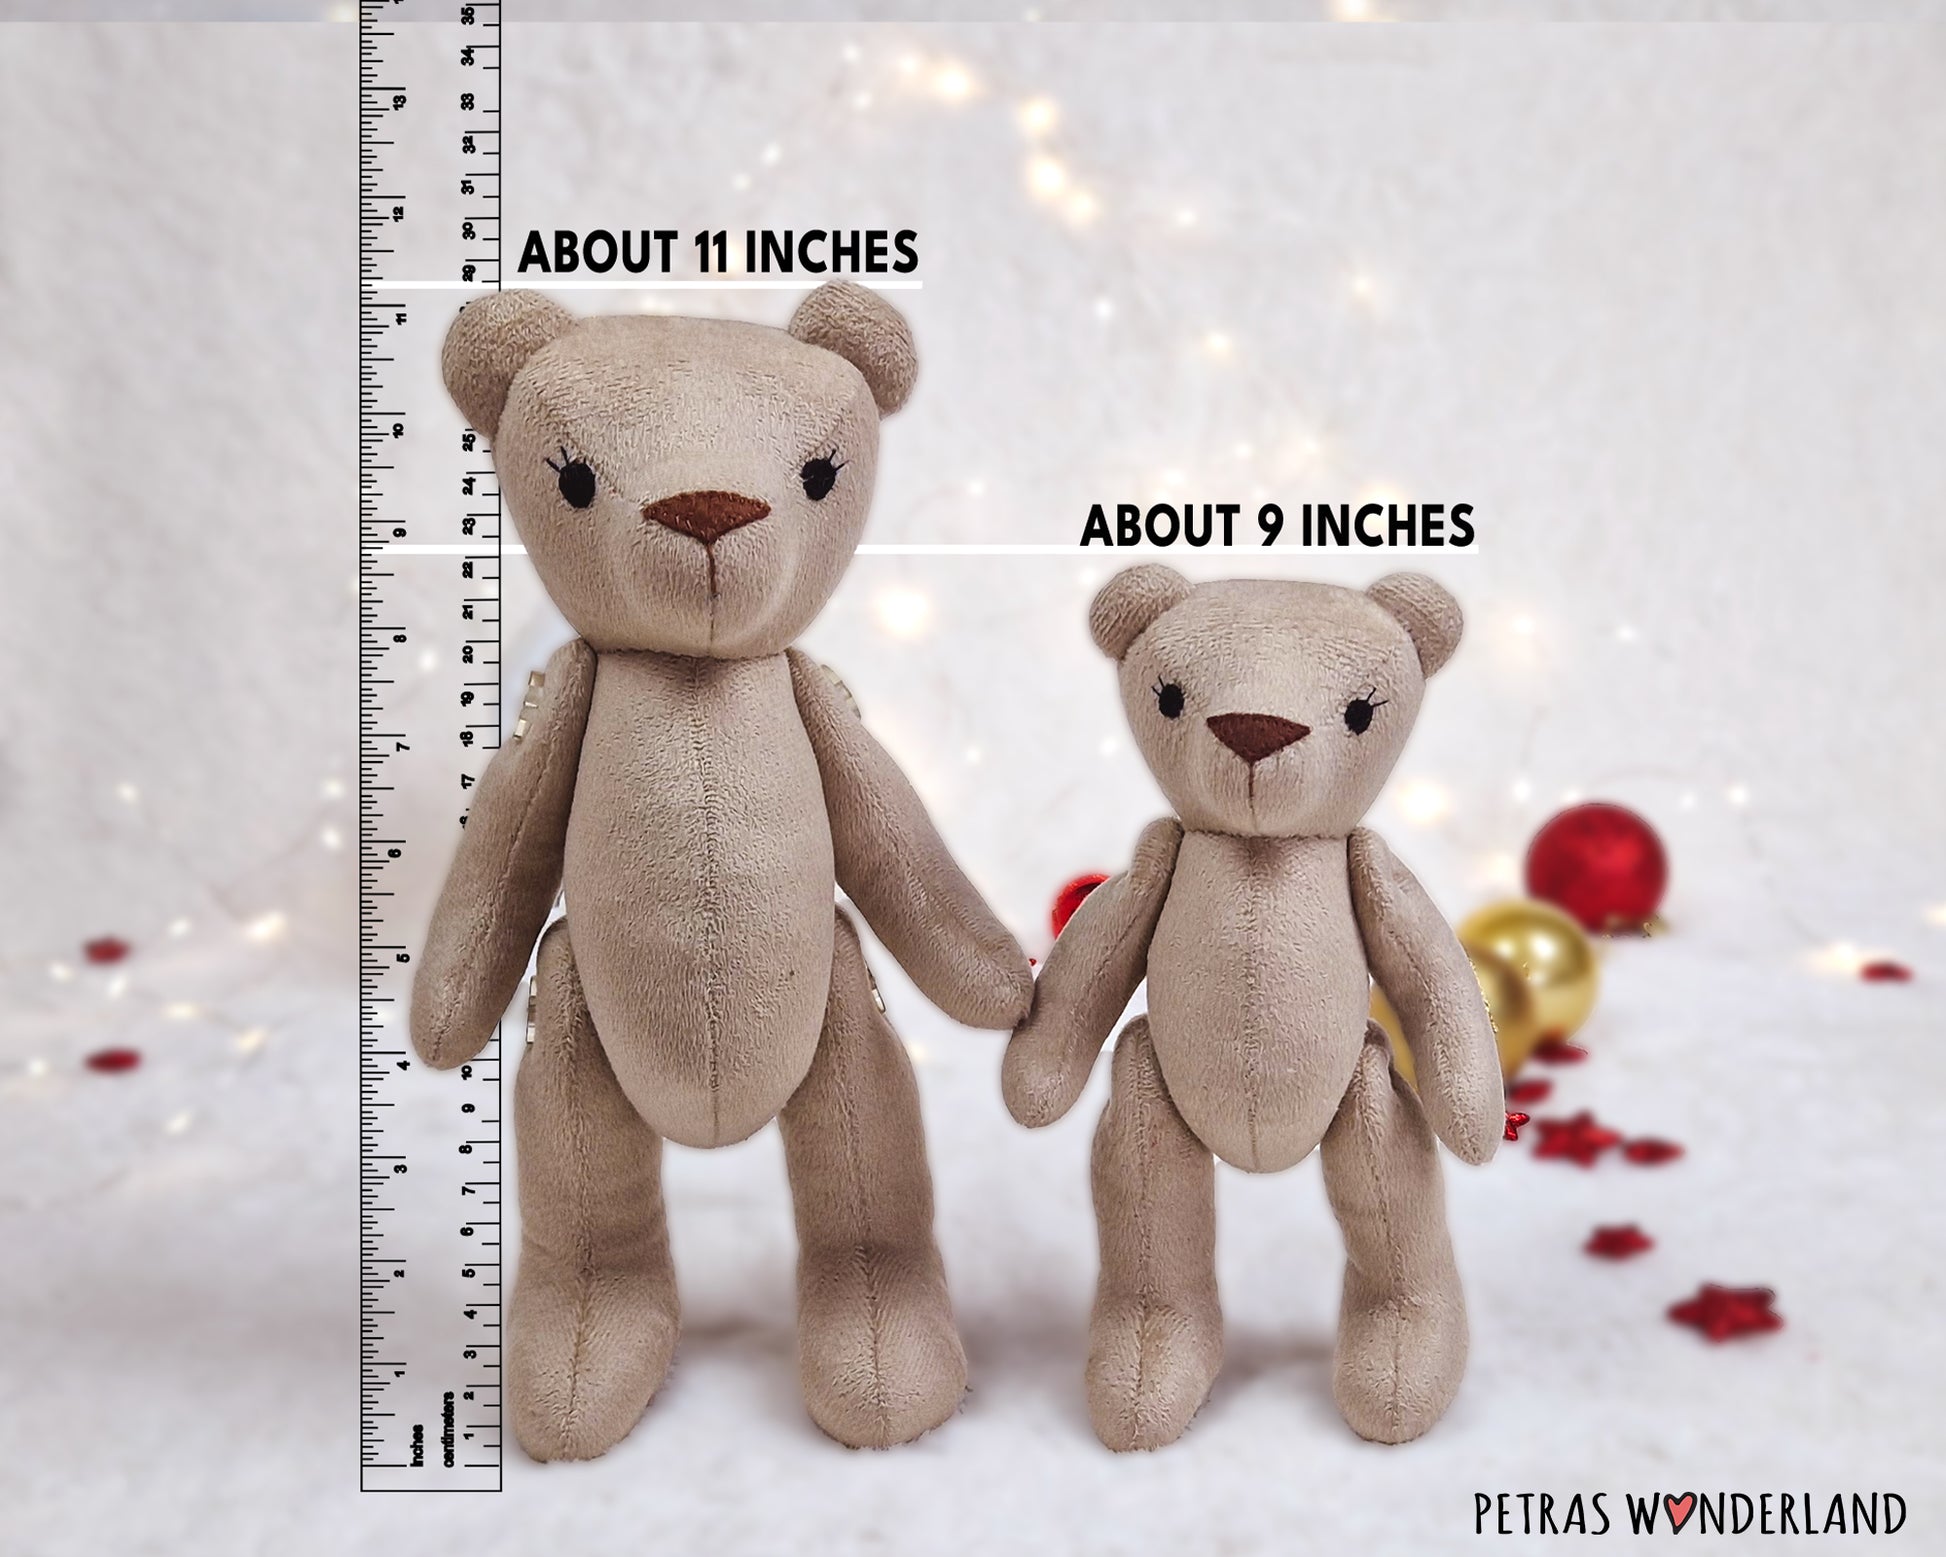 Bear Toys Family - sewing pattern and tutorial